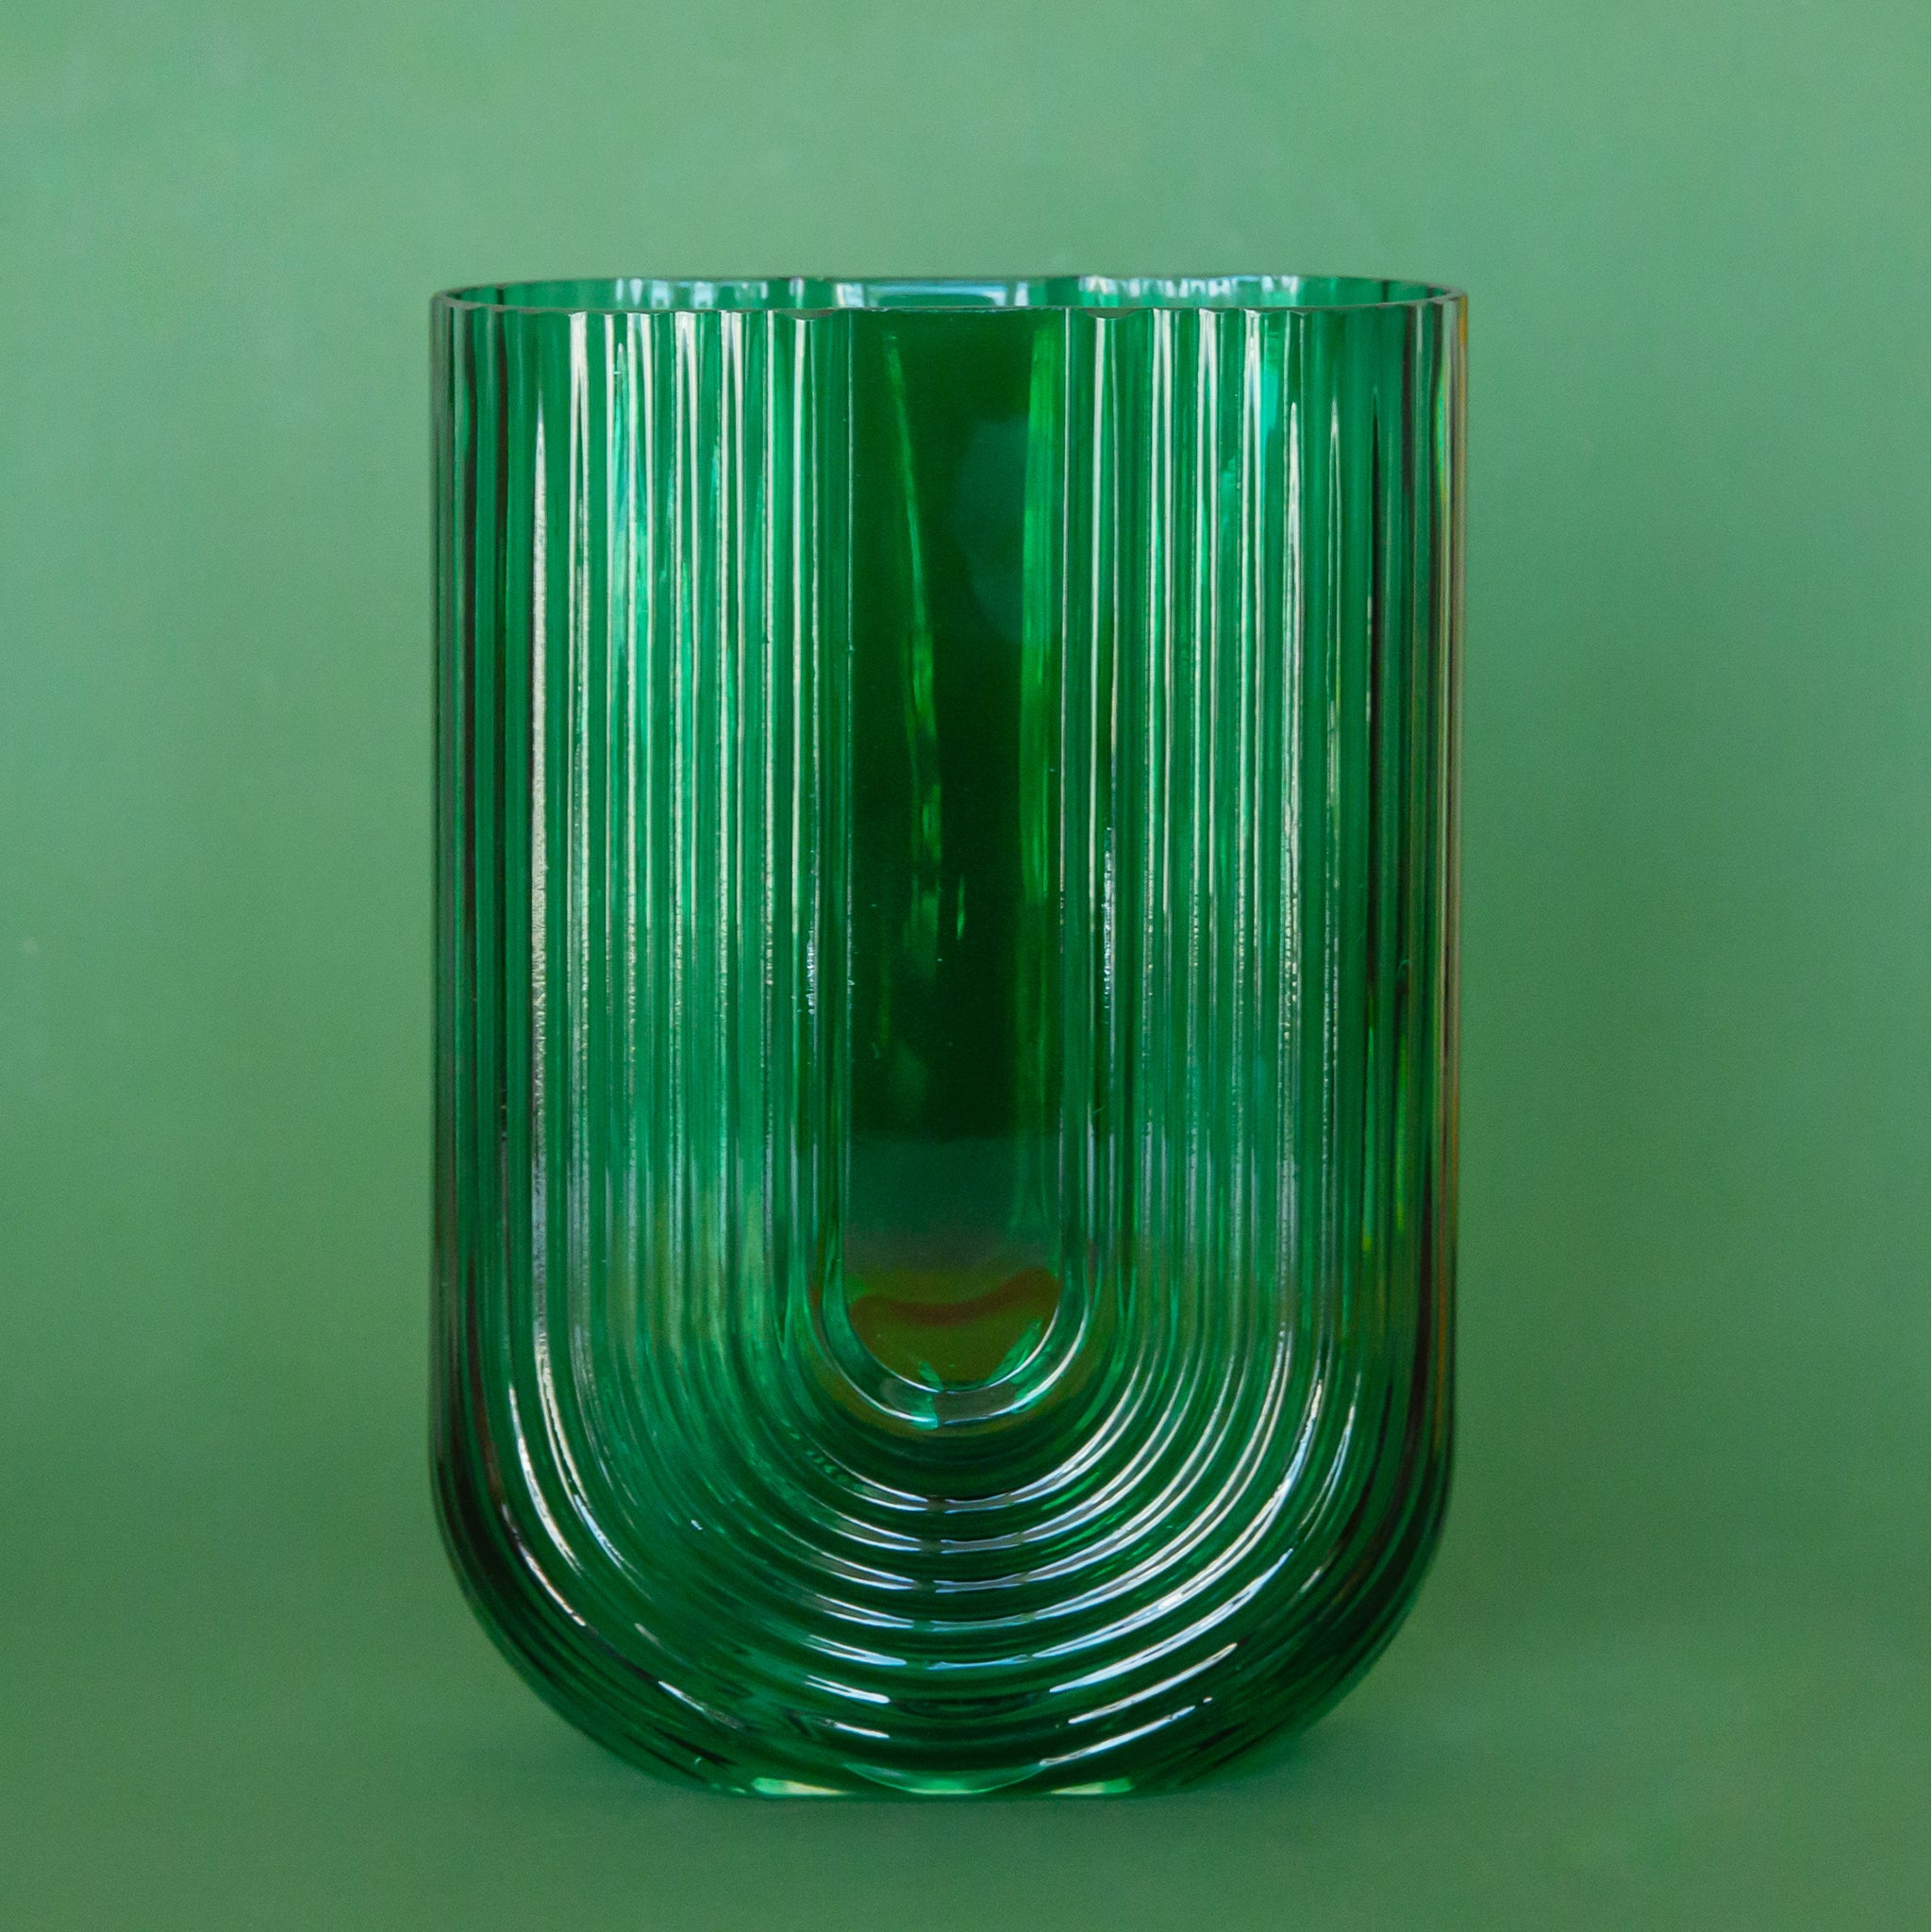 On a green background is an emerald green arched shaped glass vase. Each vase sold separately.